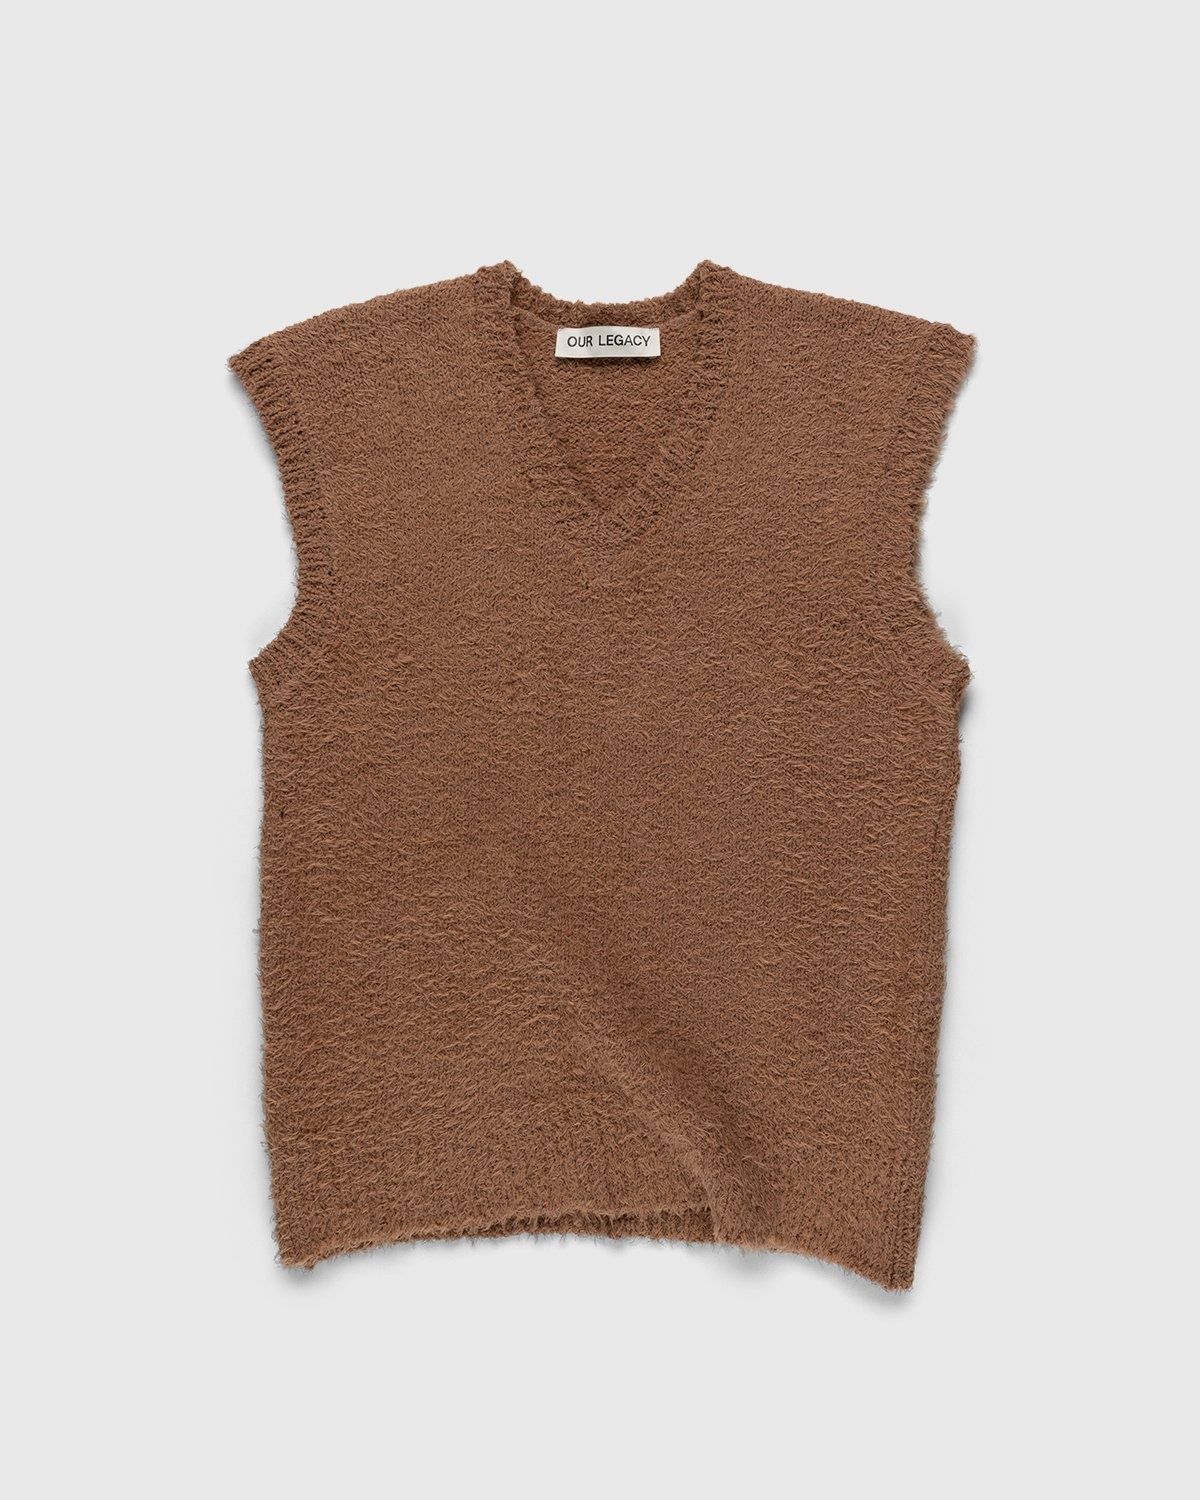 Our Legacy – Knitted Cotton Vest Caramel Cloudy - Knitwear - Beige - Image 1